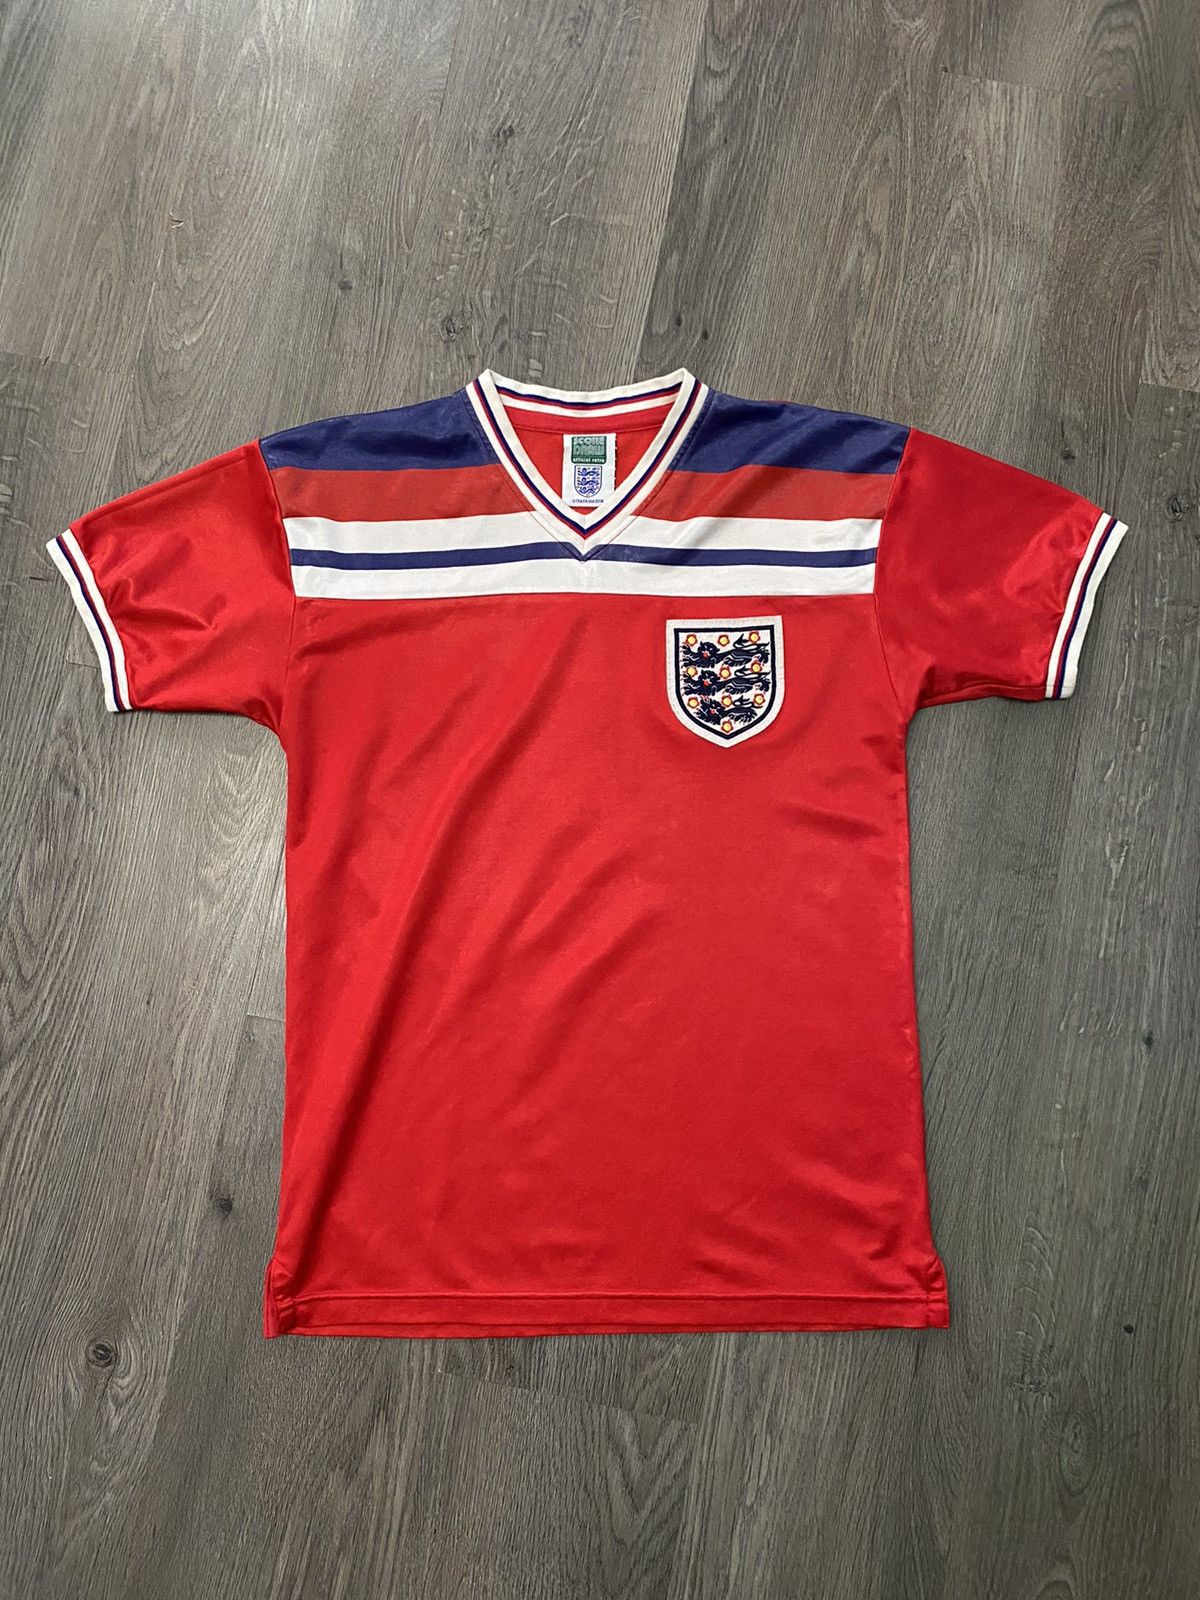 Pre-owned Jersey X Soccer Jersey Score Draw 1980 1983 England National Team Soccer Jersey In Red White